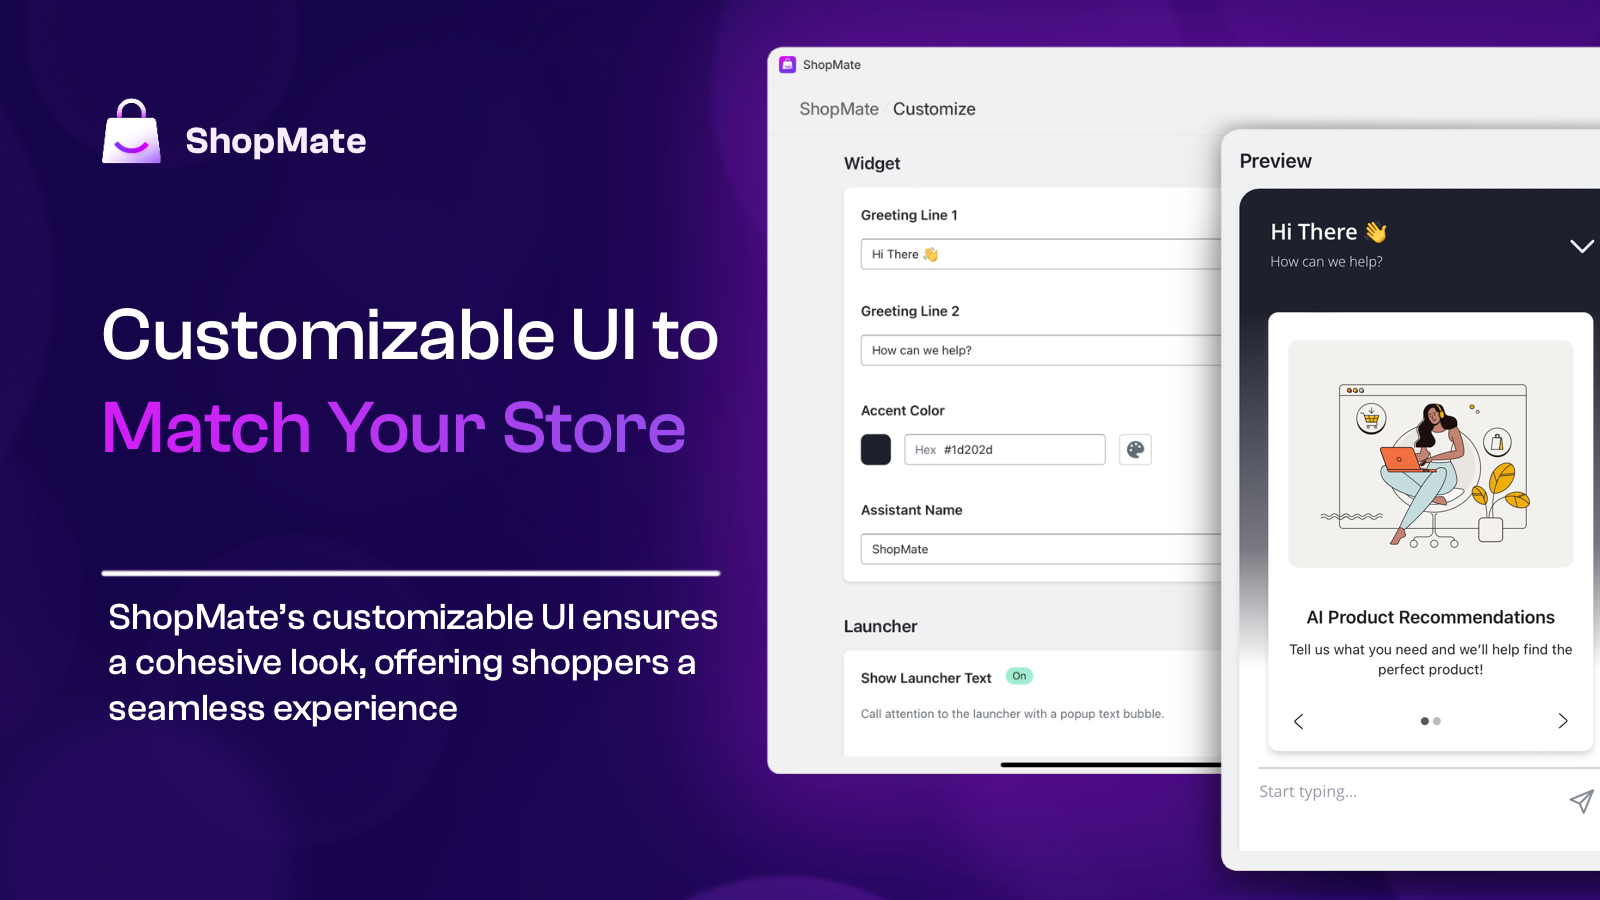 App feature - Customizable UI to match your store